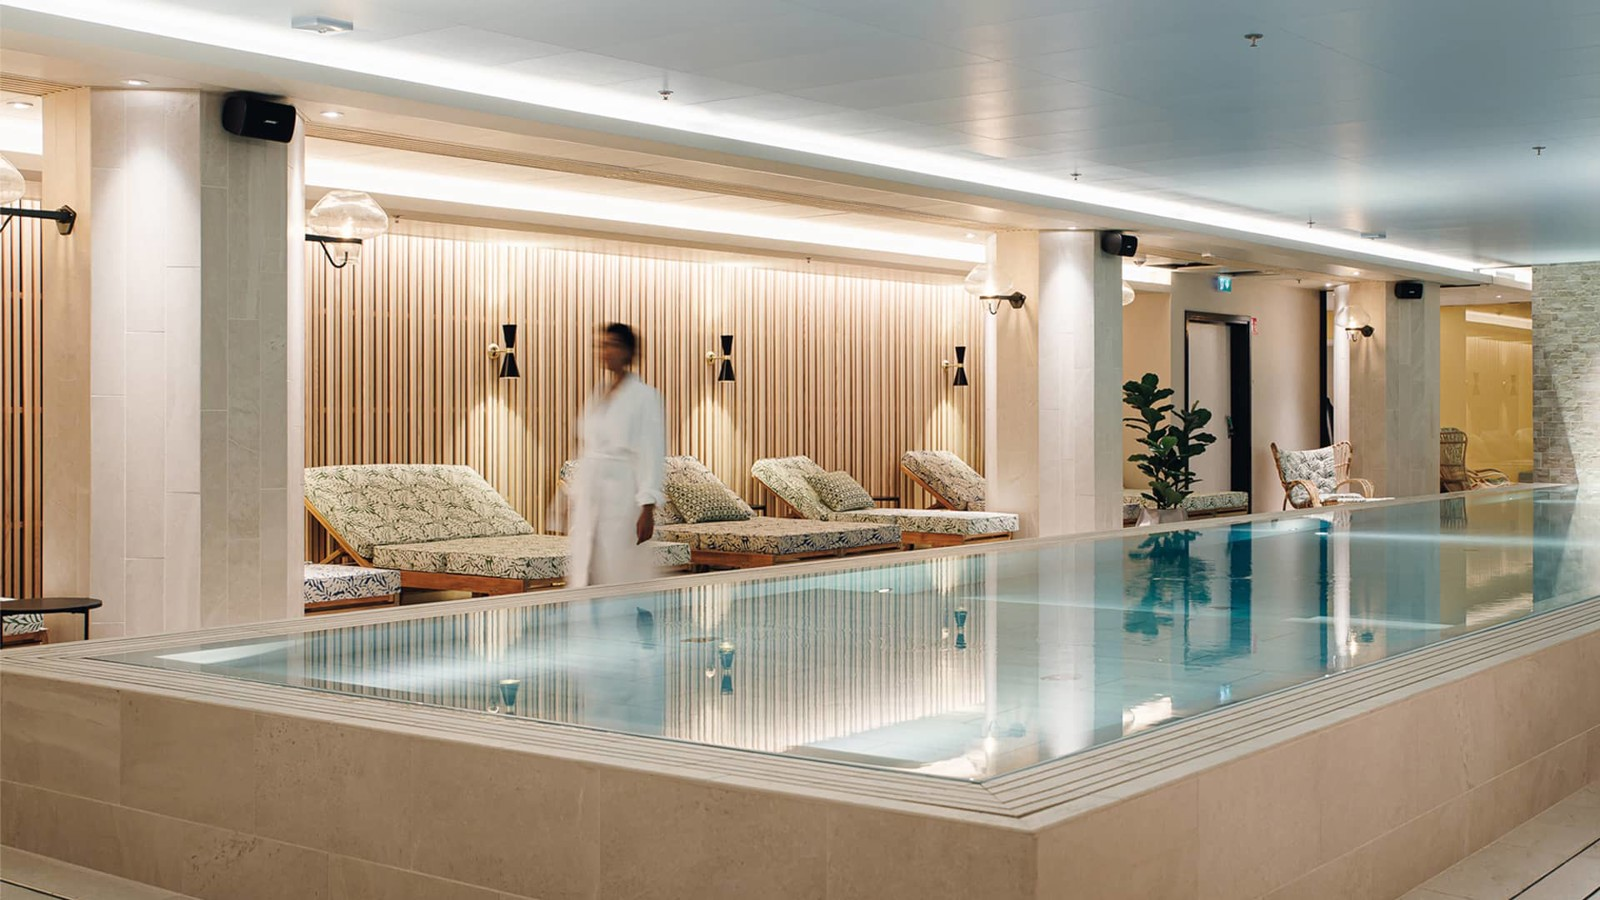 The pool and relaxation furniture at the VANA spa at the Elite Hotel Palace in Stockholm